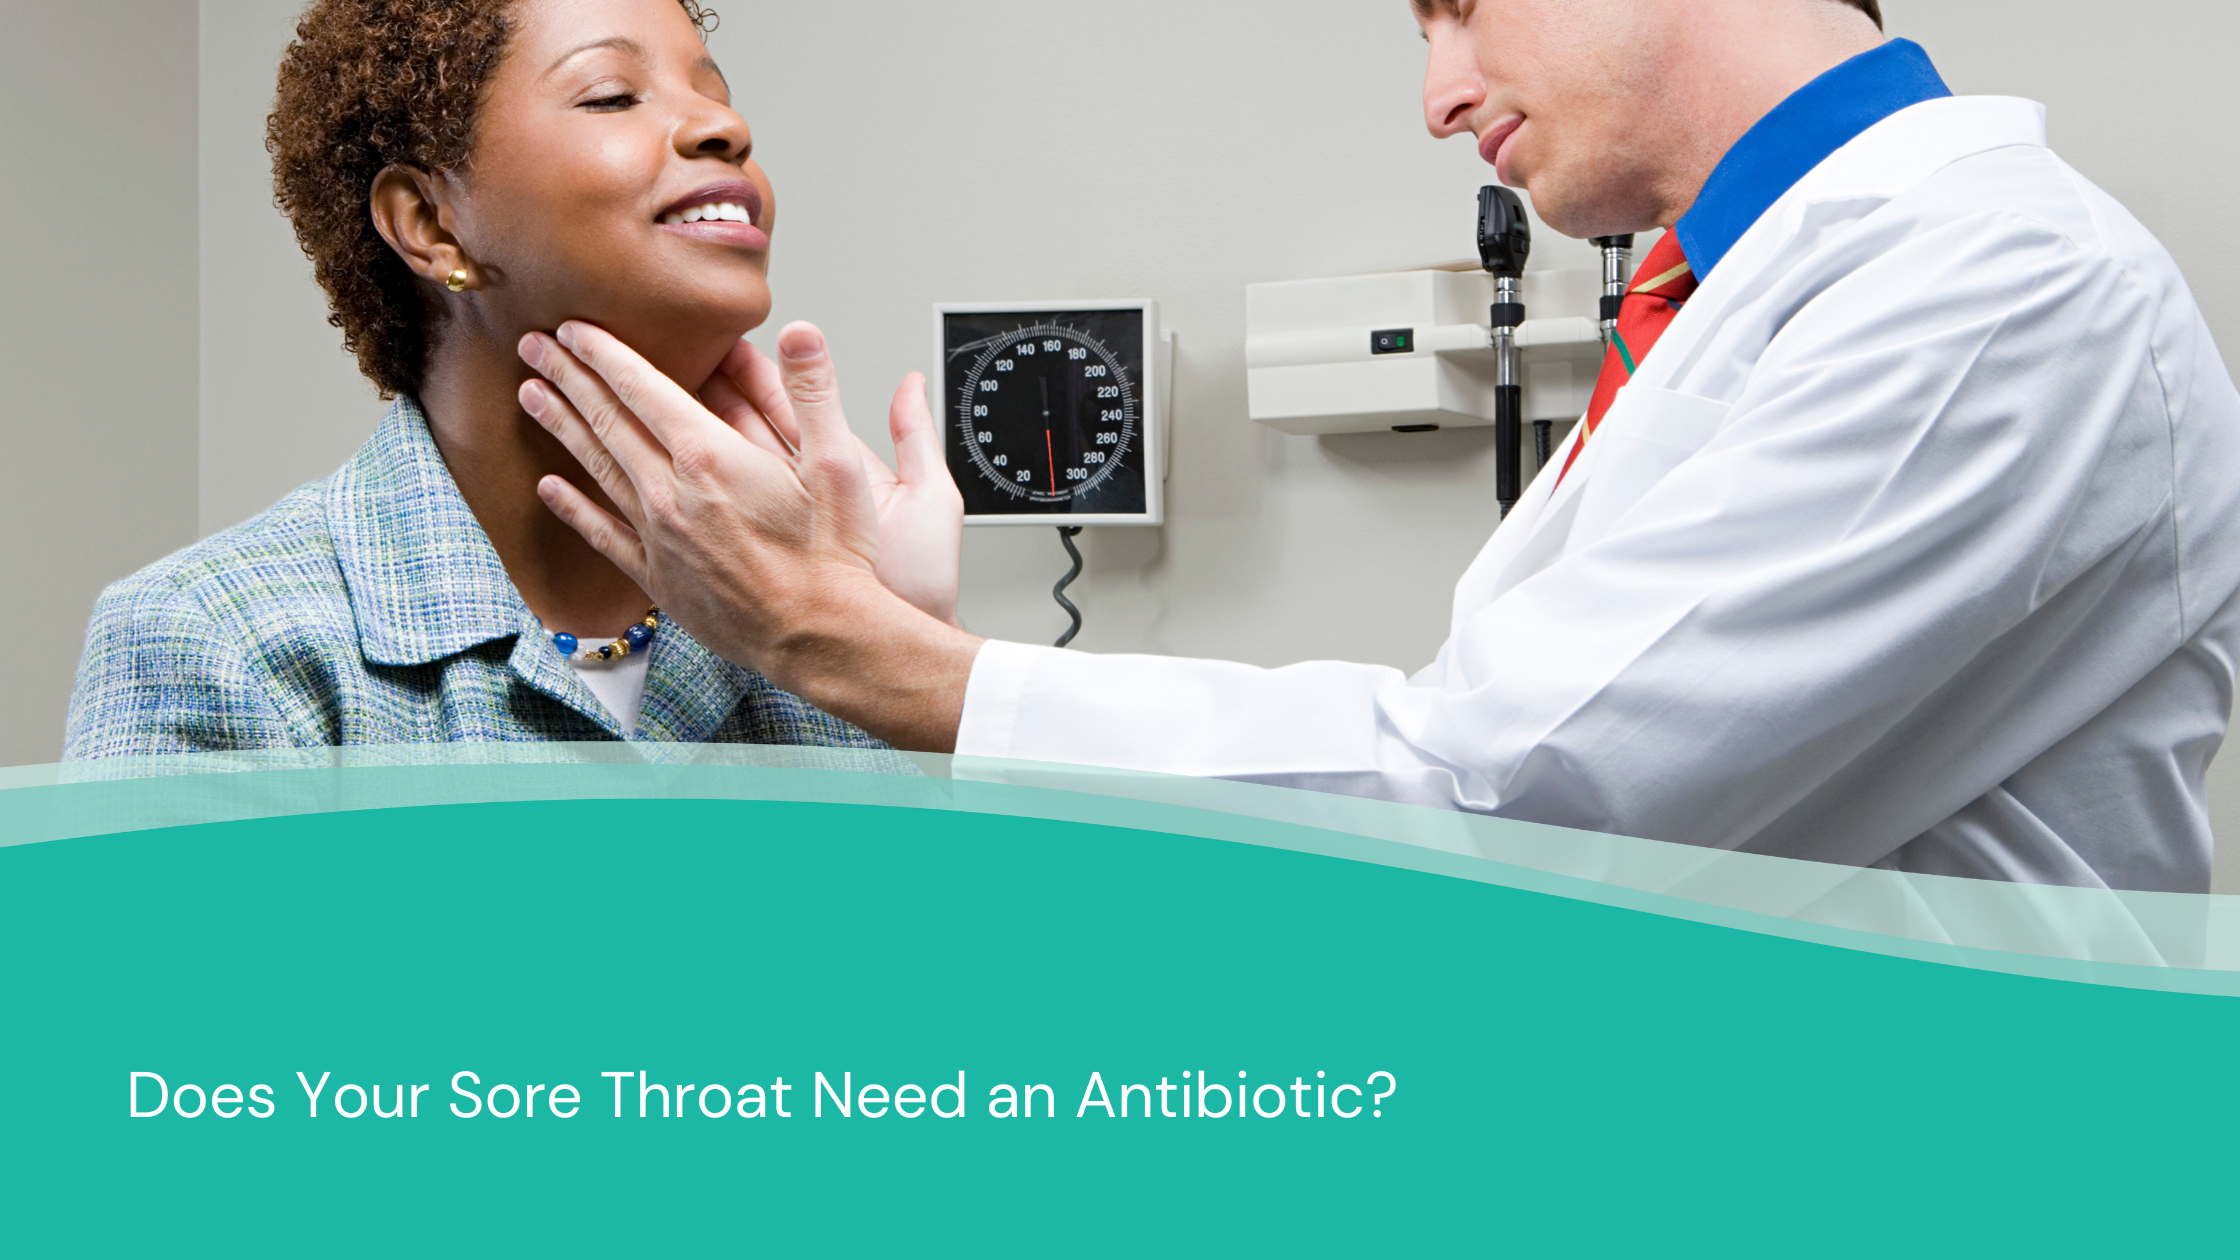 Does Your Sore Throat Need an Antibiotic?